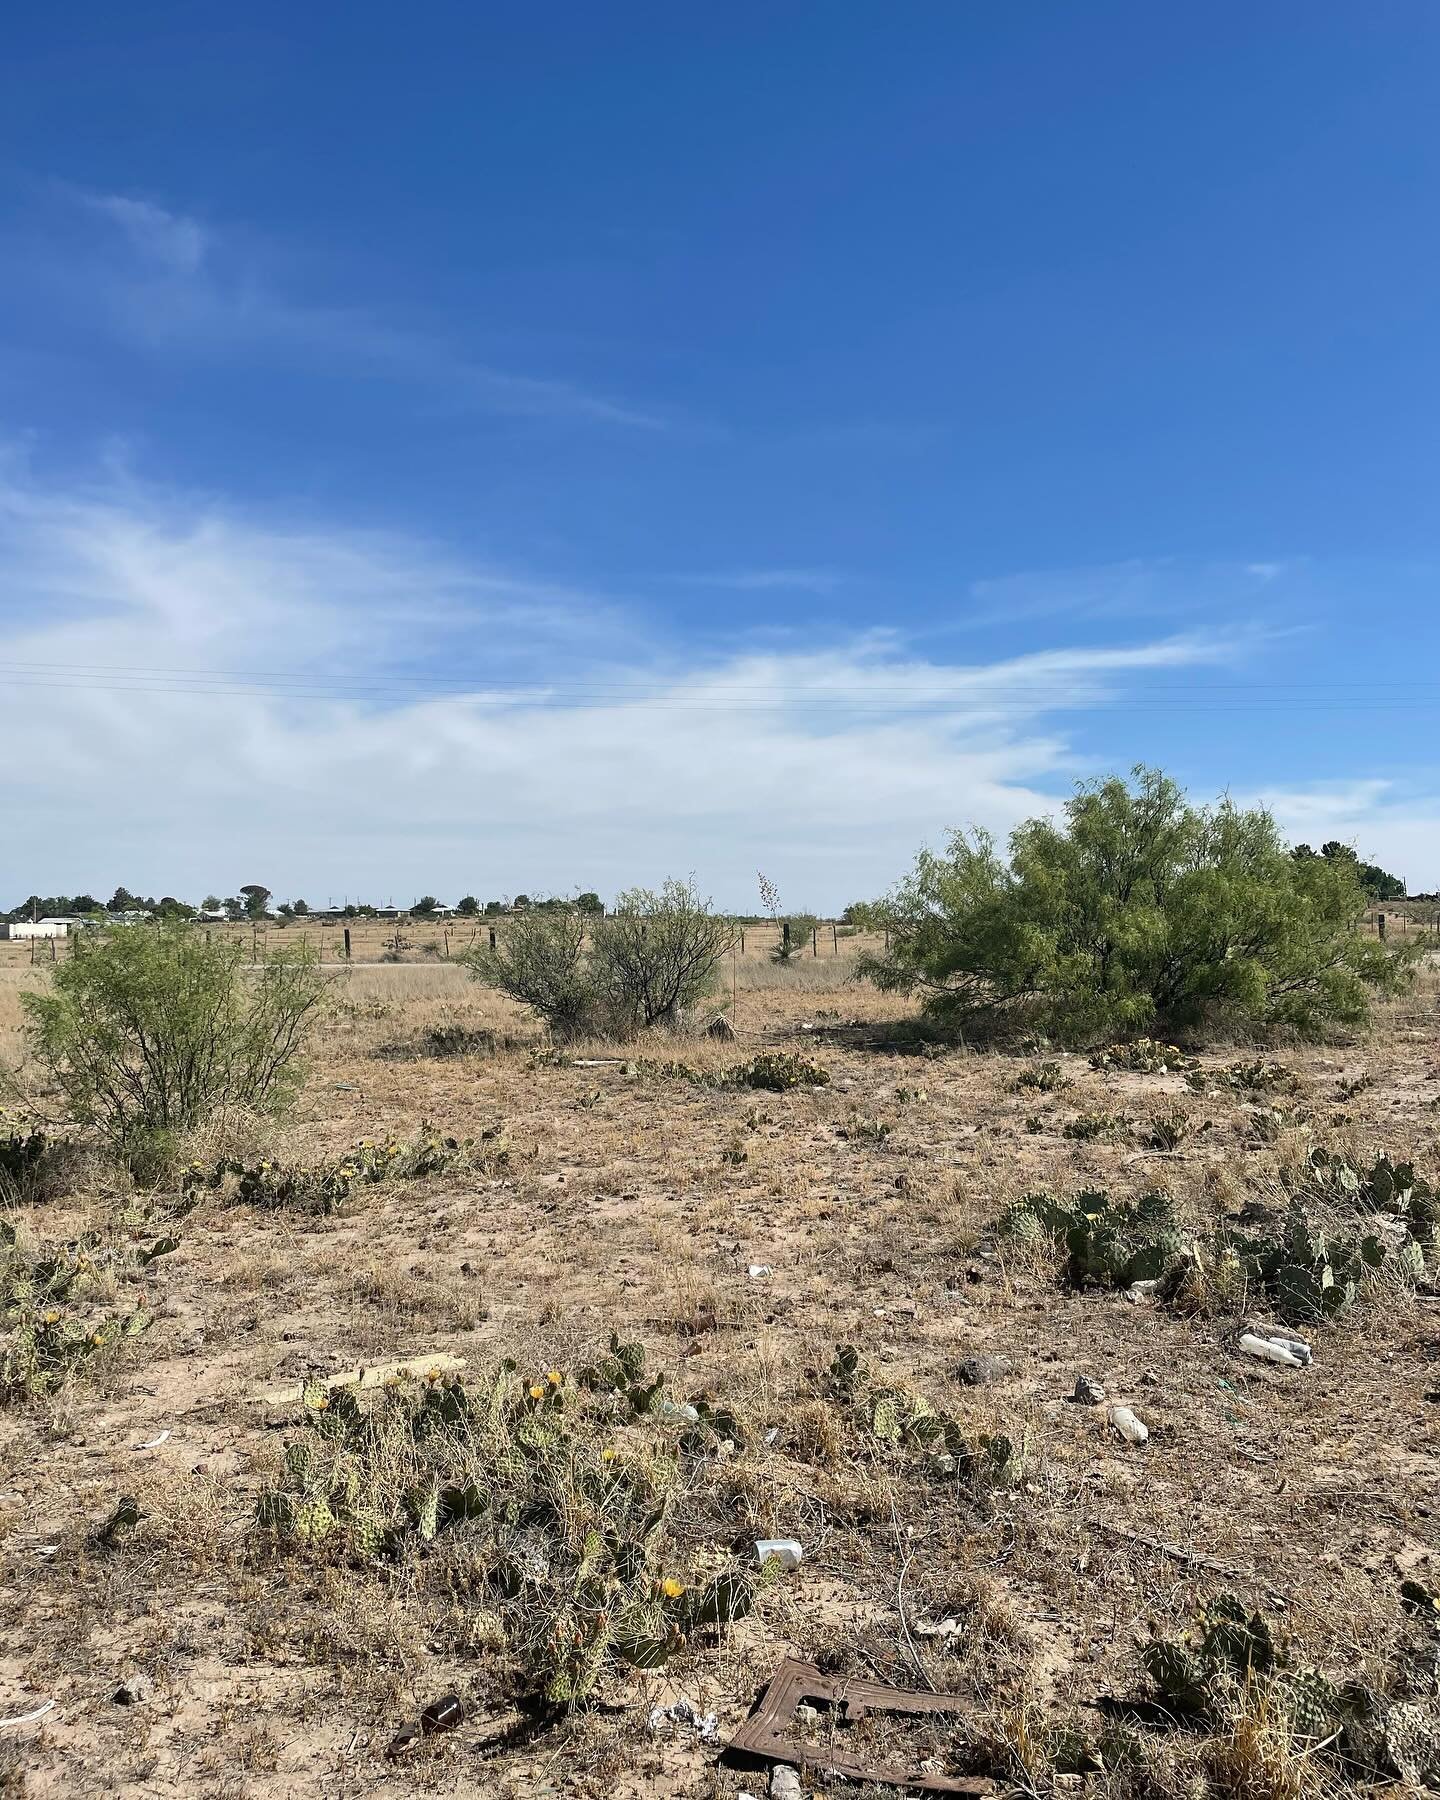 W. Madrid St at Edinburg St / 3 contiguous lots /.43 acres / for sale overlooking historic Eppenhauer Ranch / city services accessible within city limits in west Marfa zoned residential / blocks from shops &amp; restaurants / priced to sell $180,000 